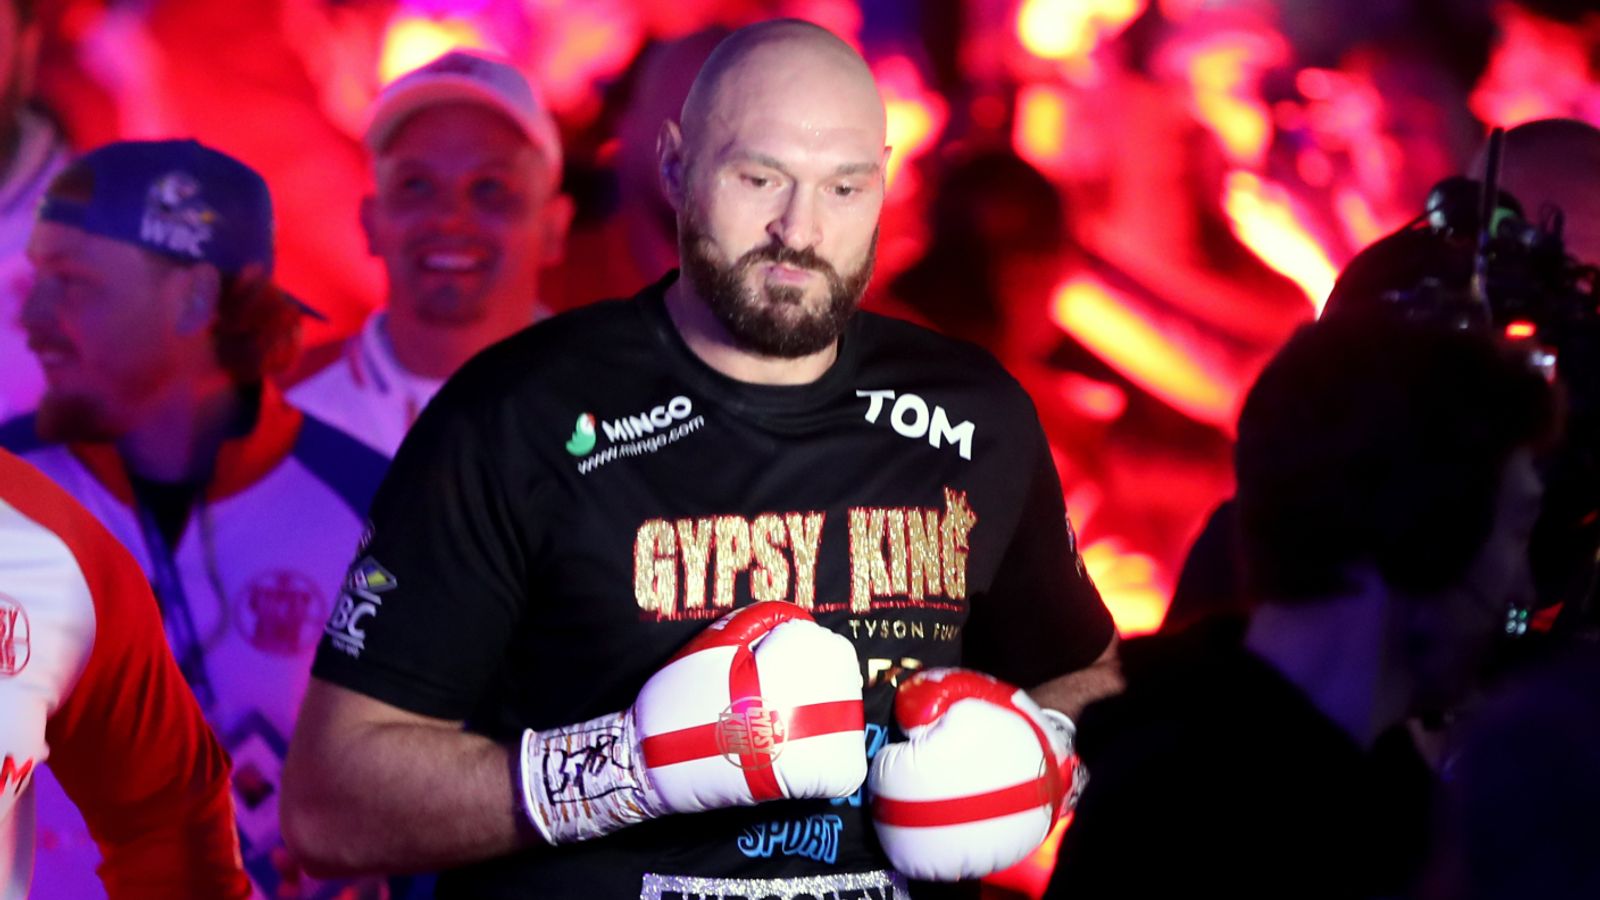 Tyson Fury: Top Rank president Todd duBoef on what could tempt ‘The Gypsy King’ back into the ring